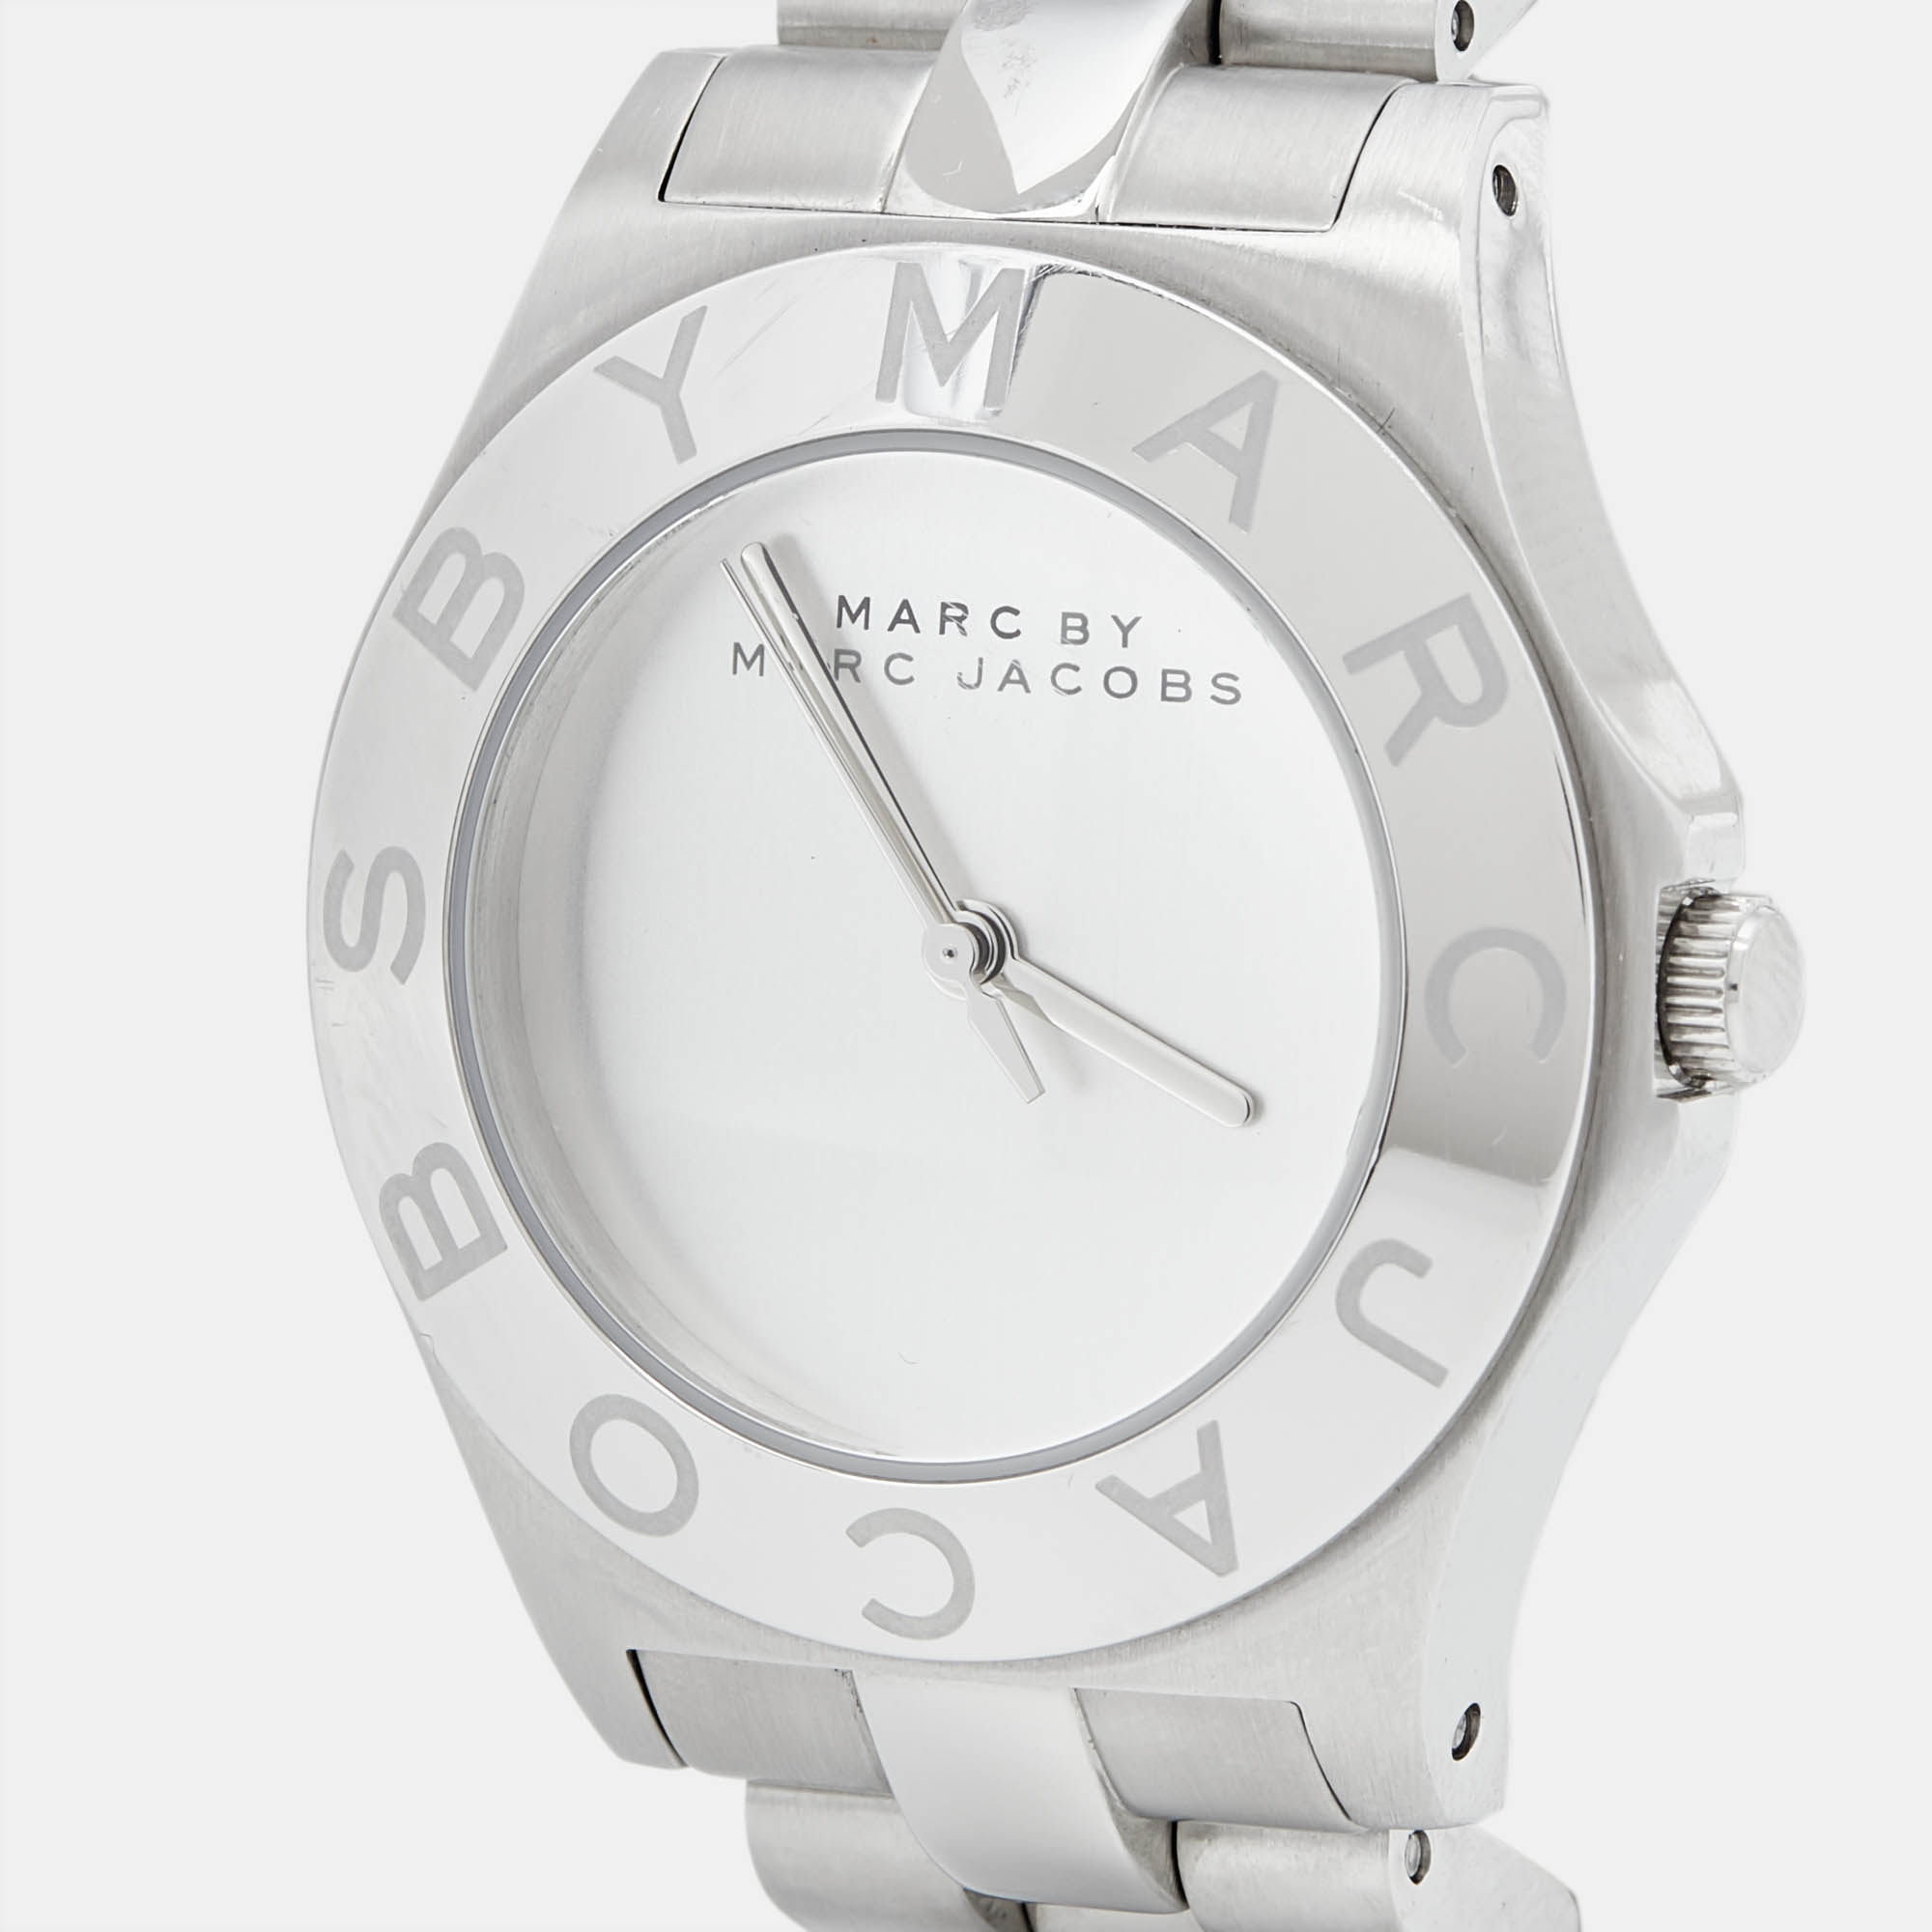 

Marc by Marc Jacobs Silver Stainless Steel Blade MBM3125 Women's Wristwatch